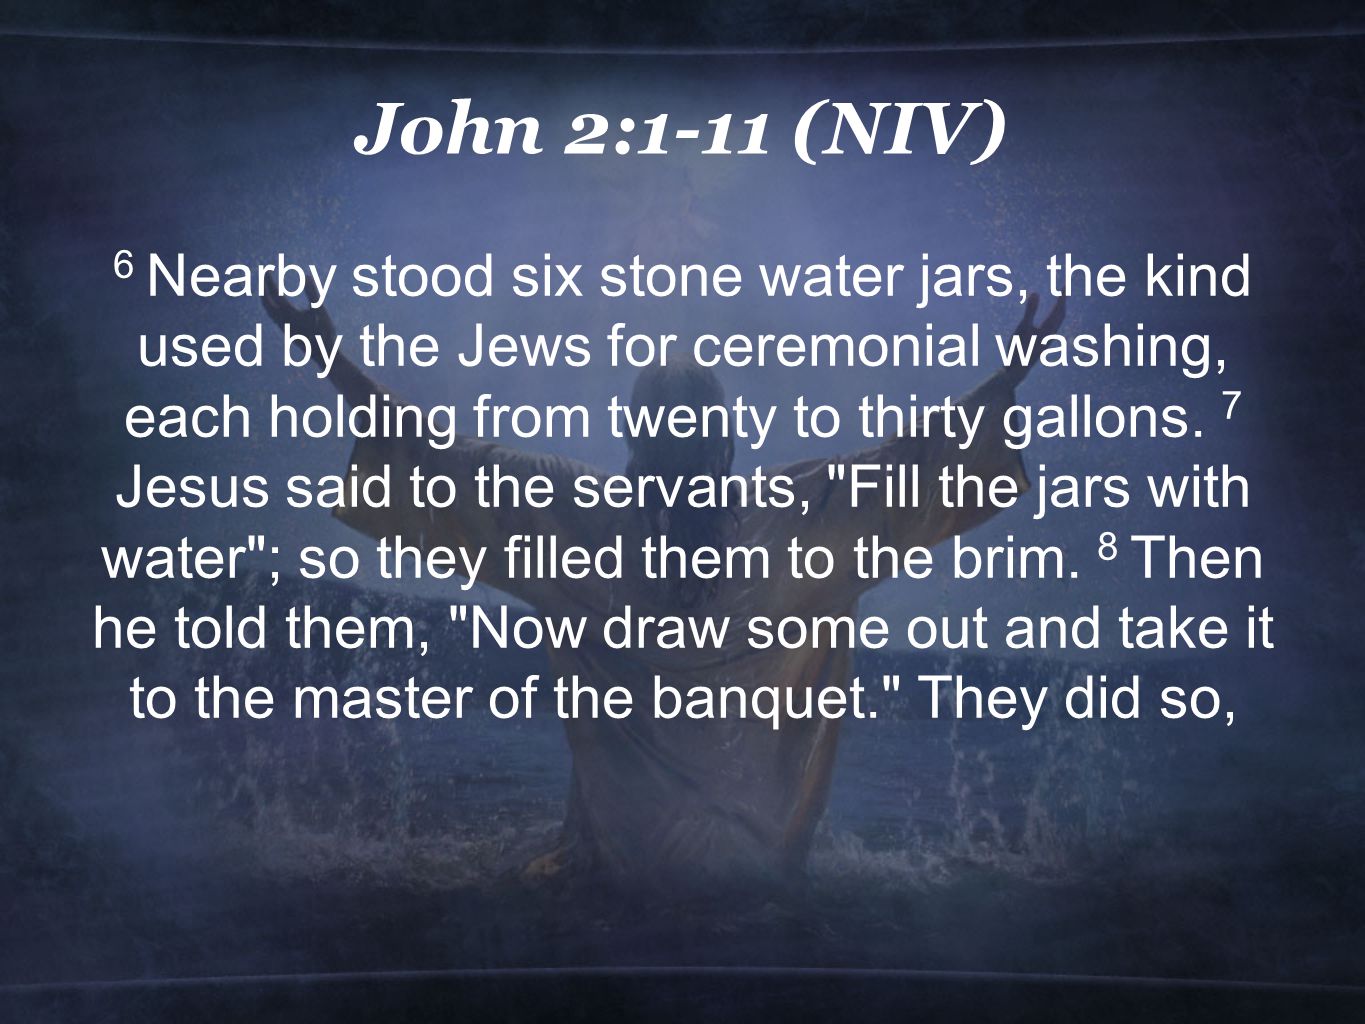 John 2:1-11 (NIV) 6 Nearby stood six stone water jars, the kind used by the Jews for ceremonial washing, each holding from twenty to thirty gallons.